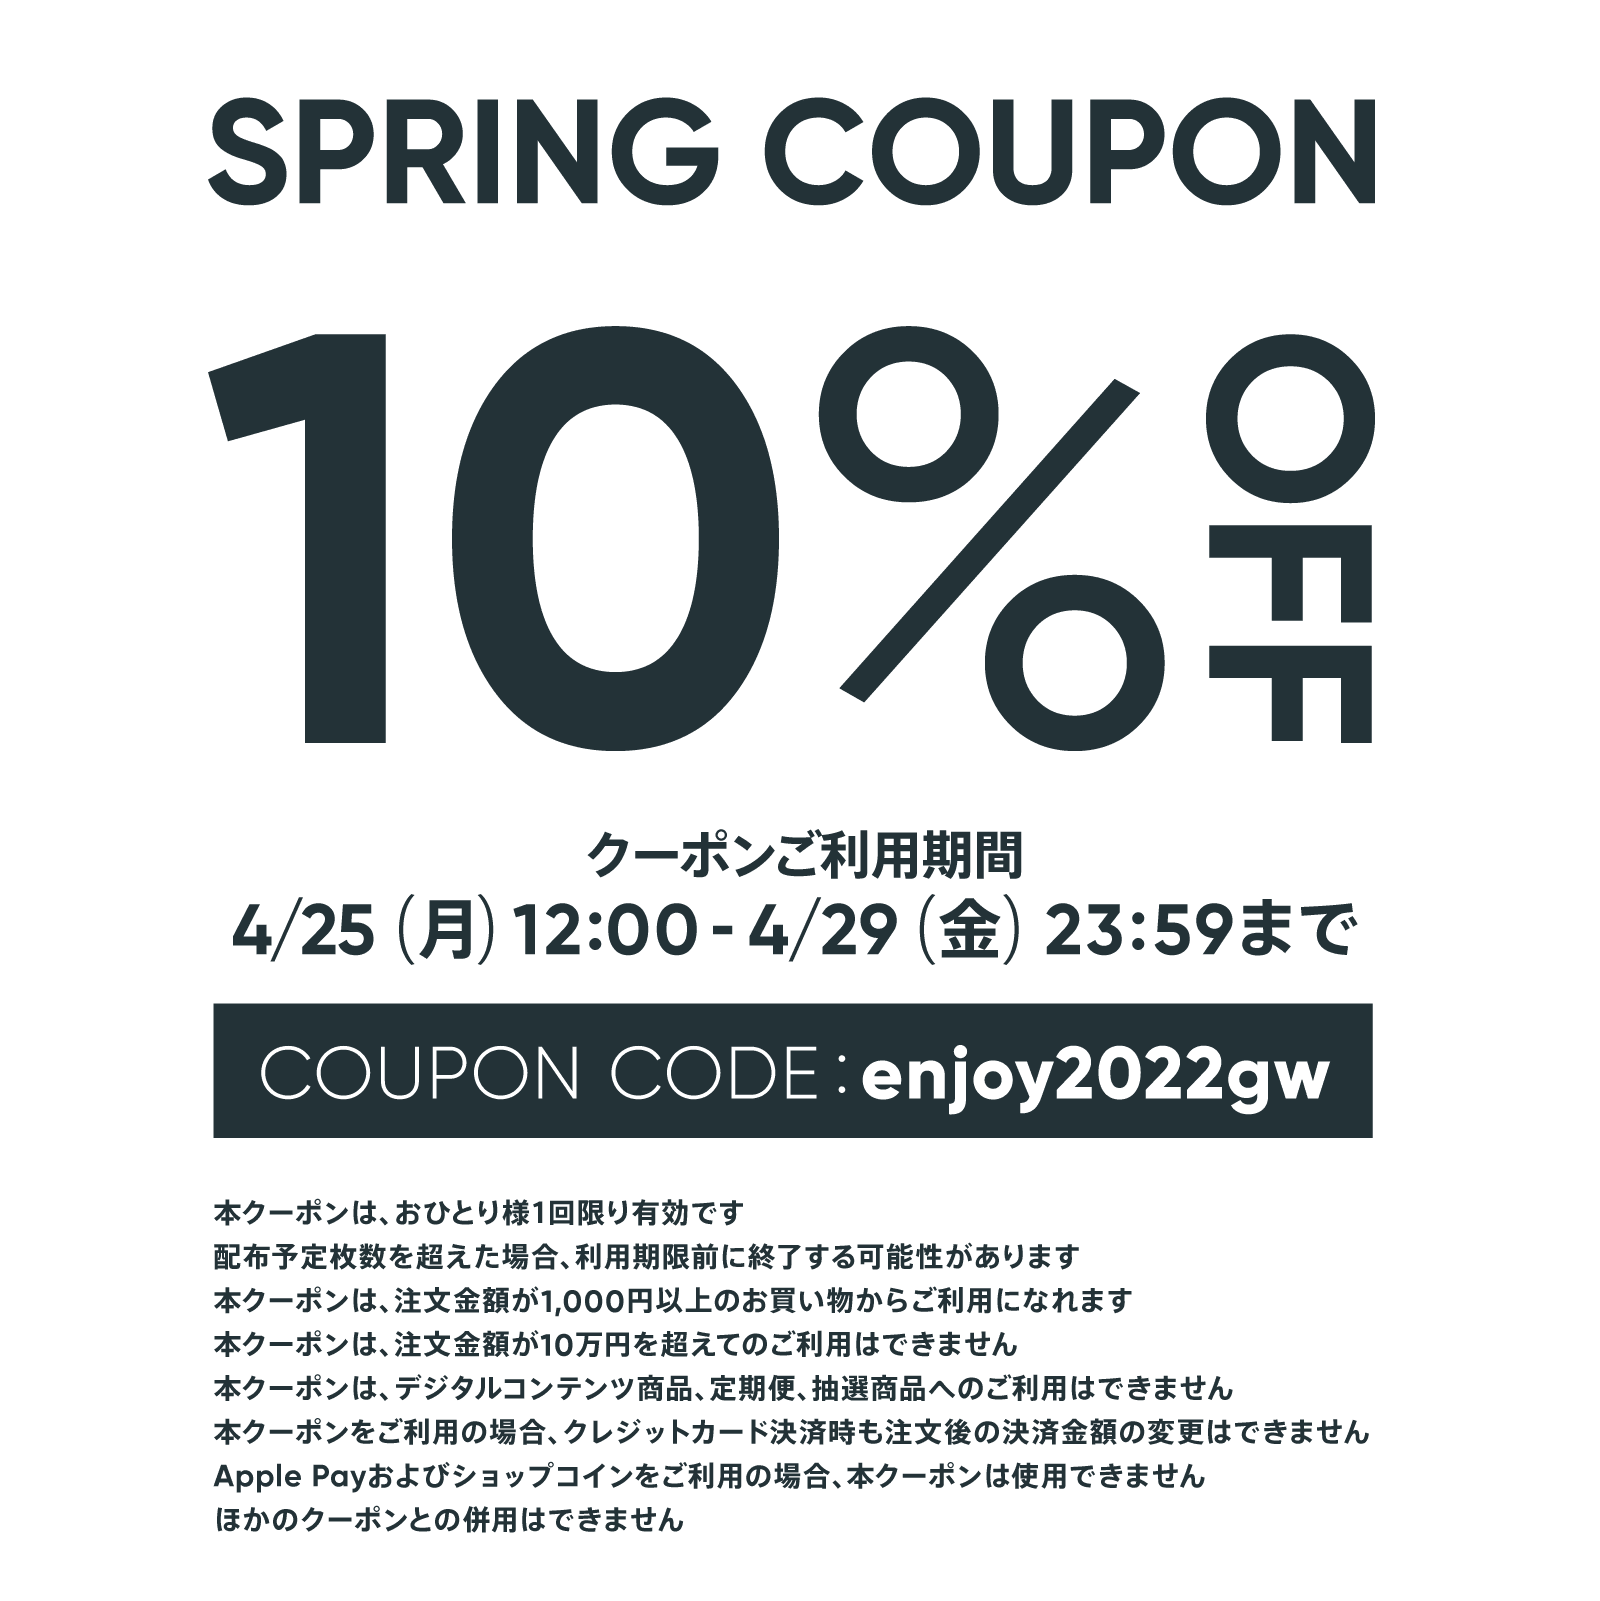 SPRING COUPON 10% OFF